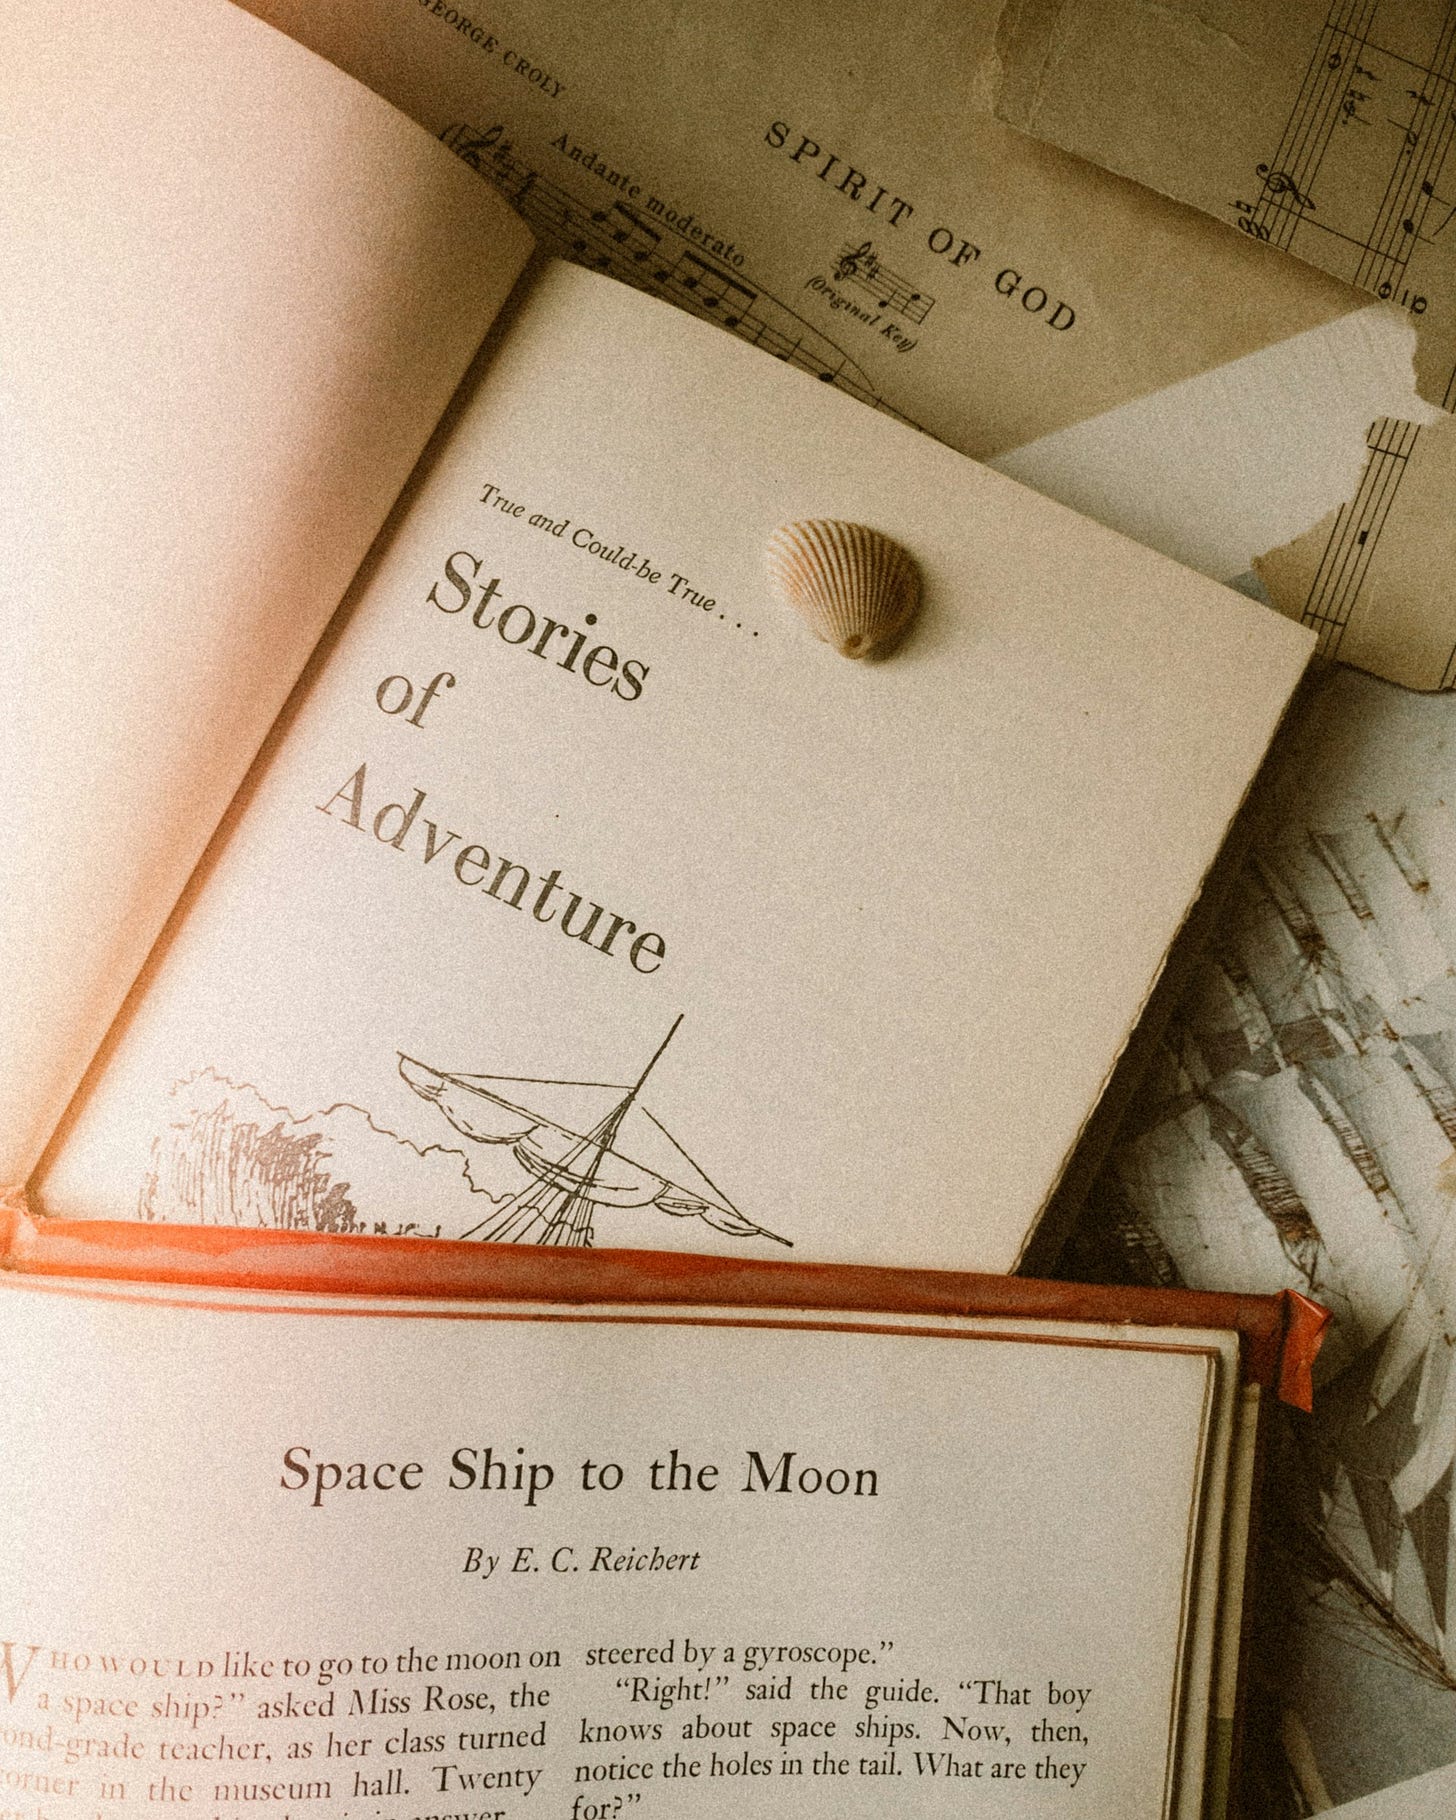 Open books titled “Stories of Adventure” and “Space Ship to the Moon” lay on top of a music score titled “Spirit of God” 